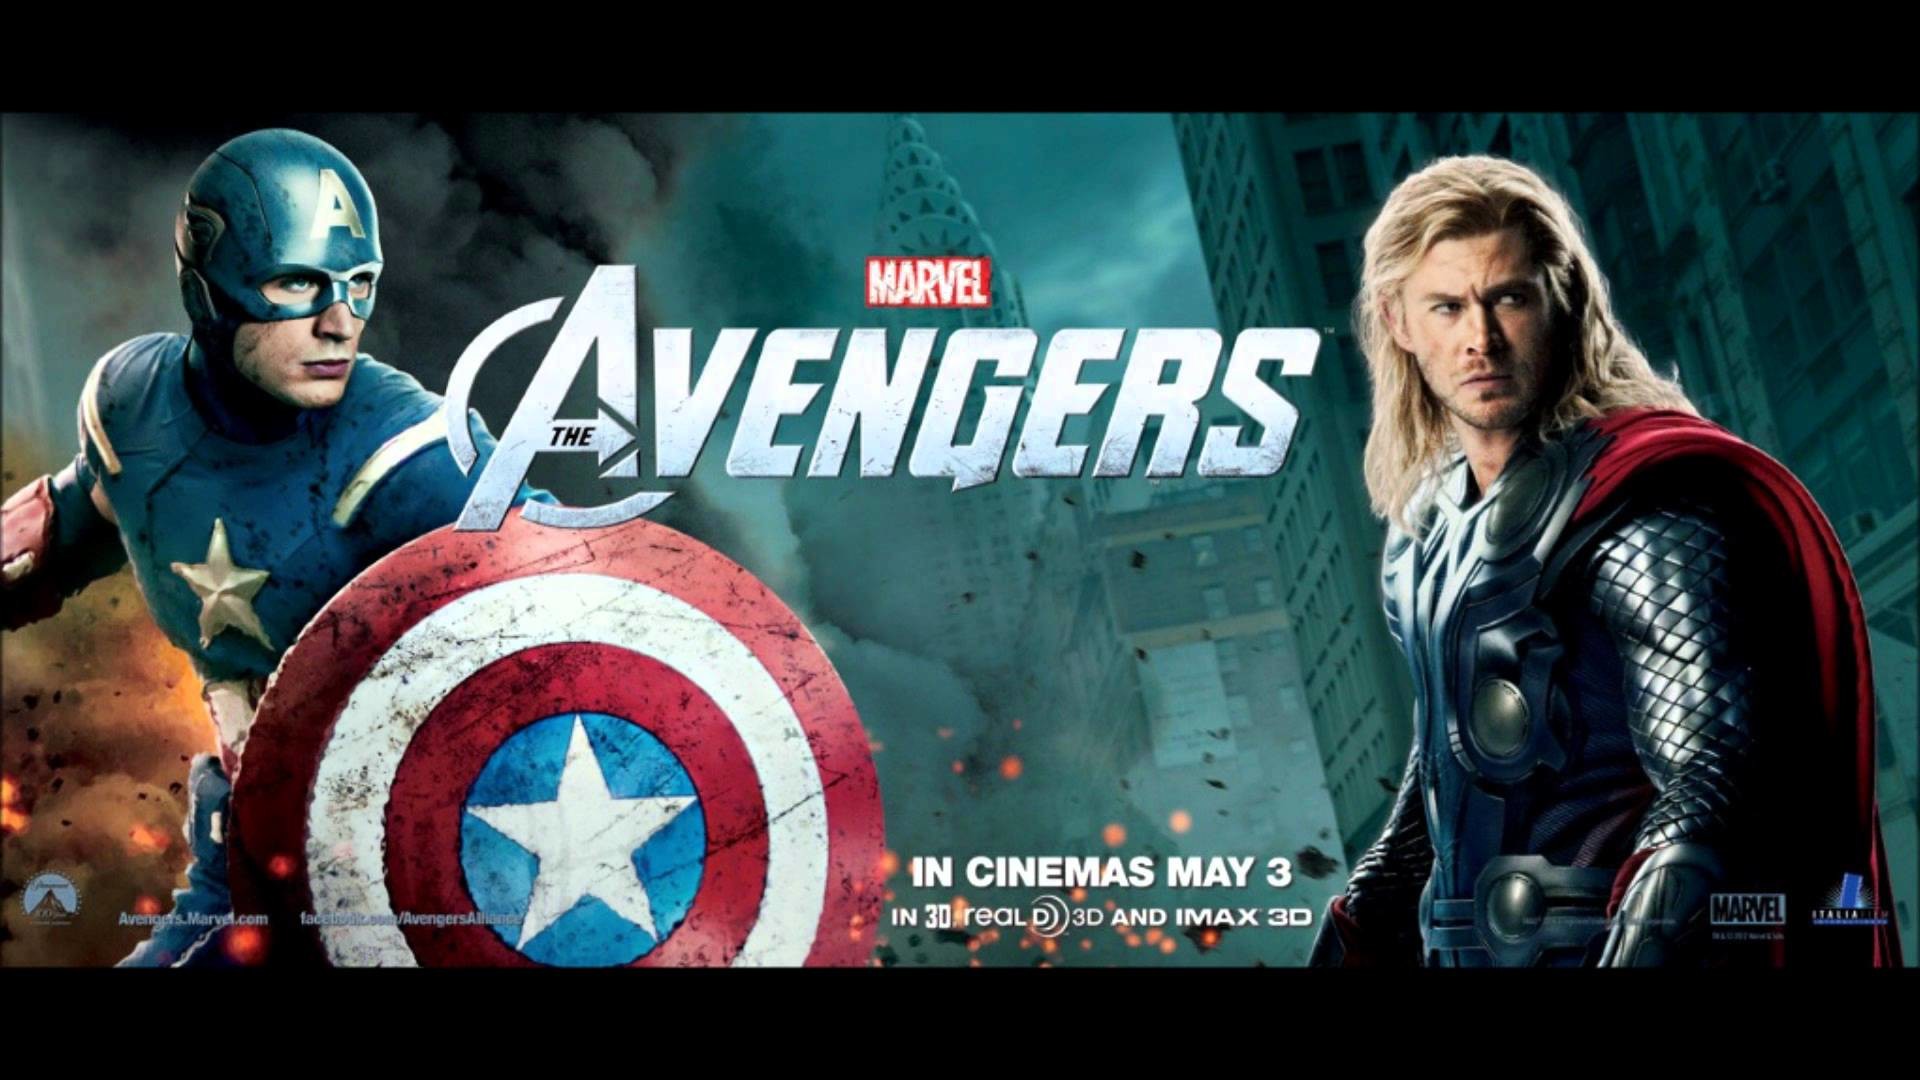 1920x1080 Marvel's The Avengers HD Posters & Wallpaper in 1080p